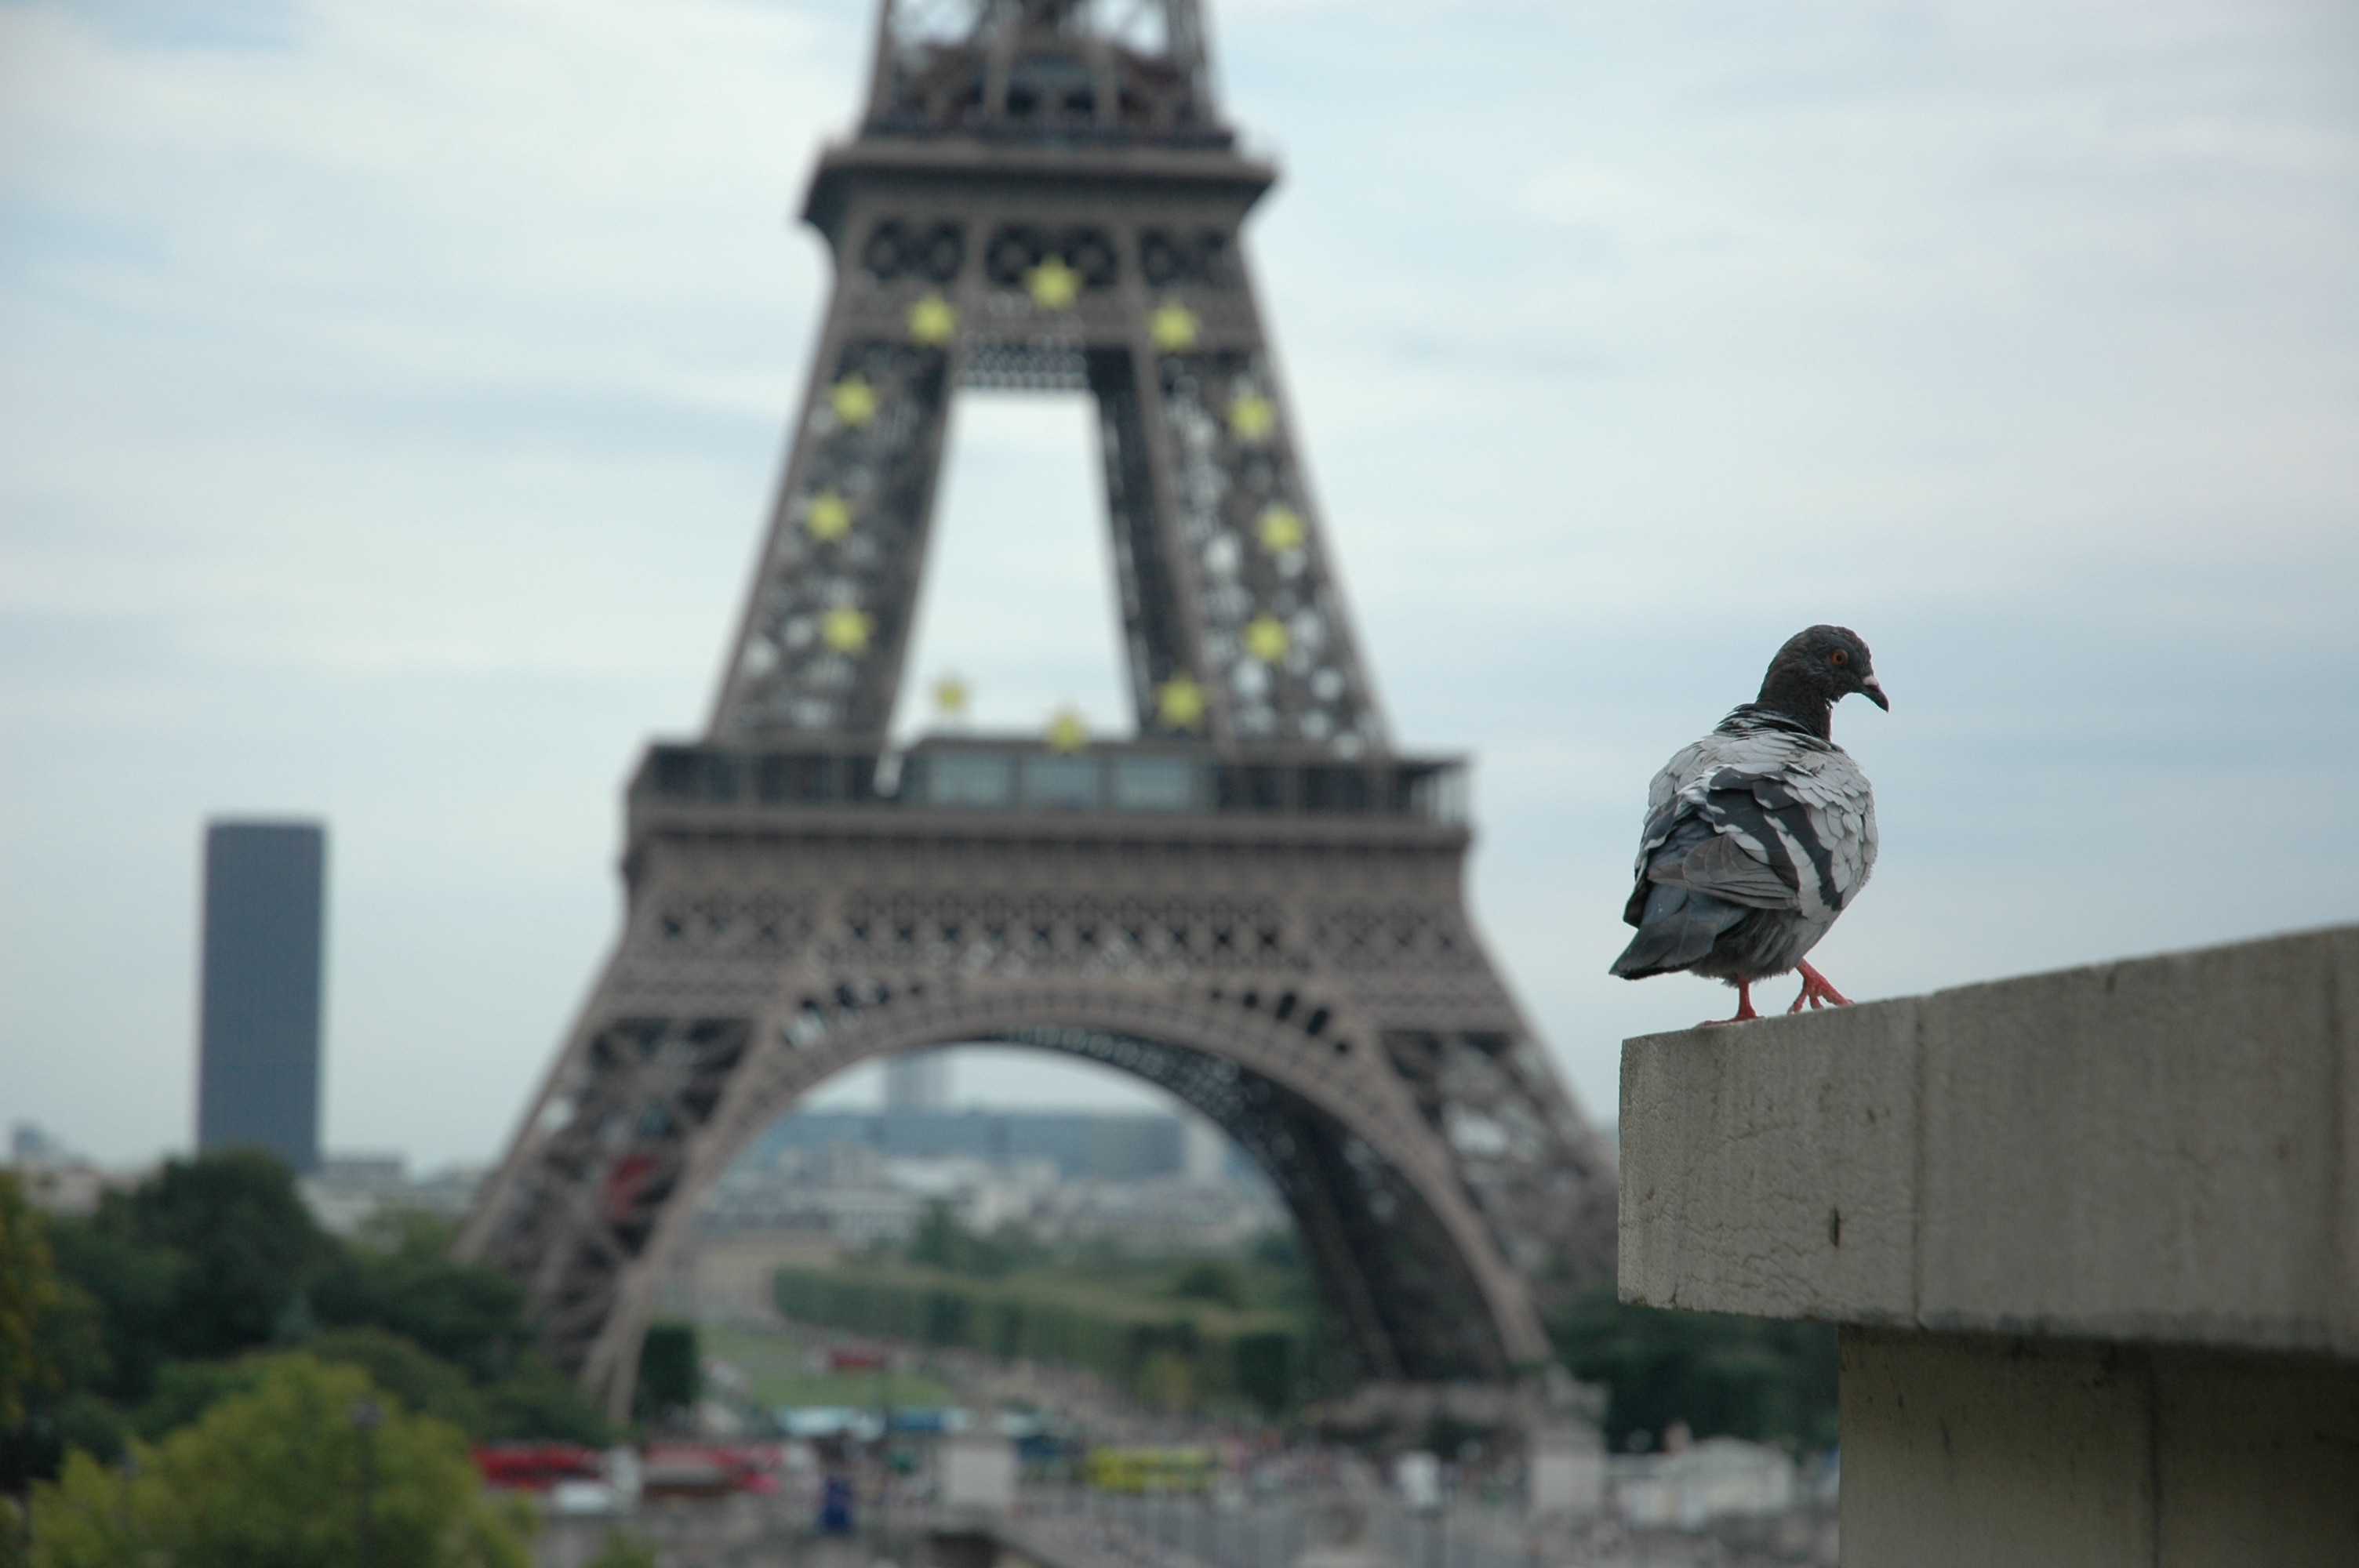 The Dove and the Eiffel Tower